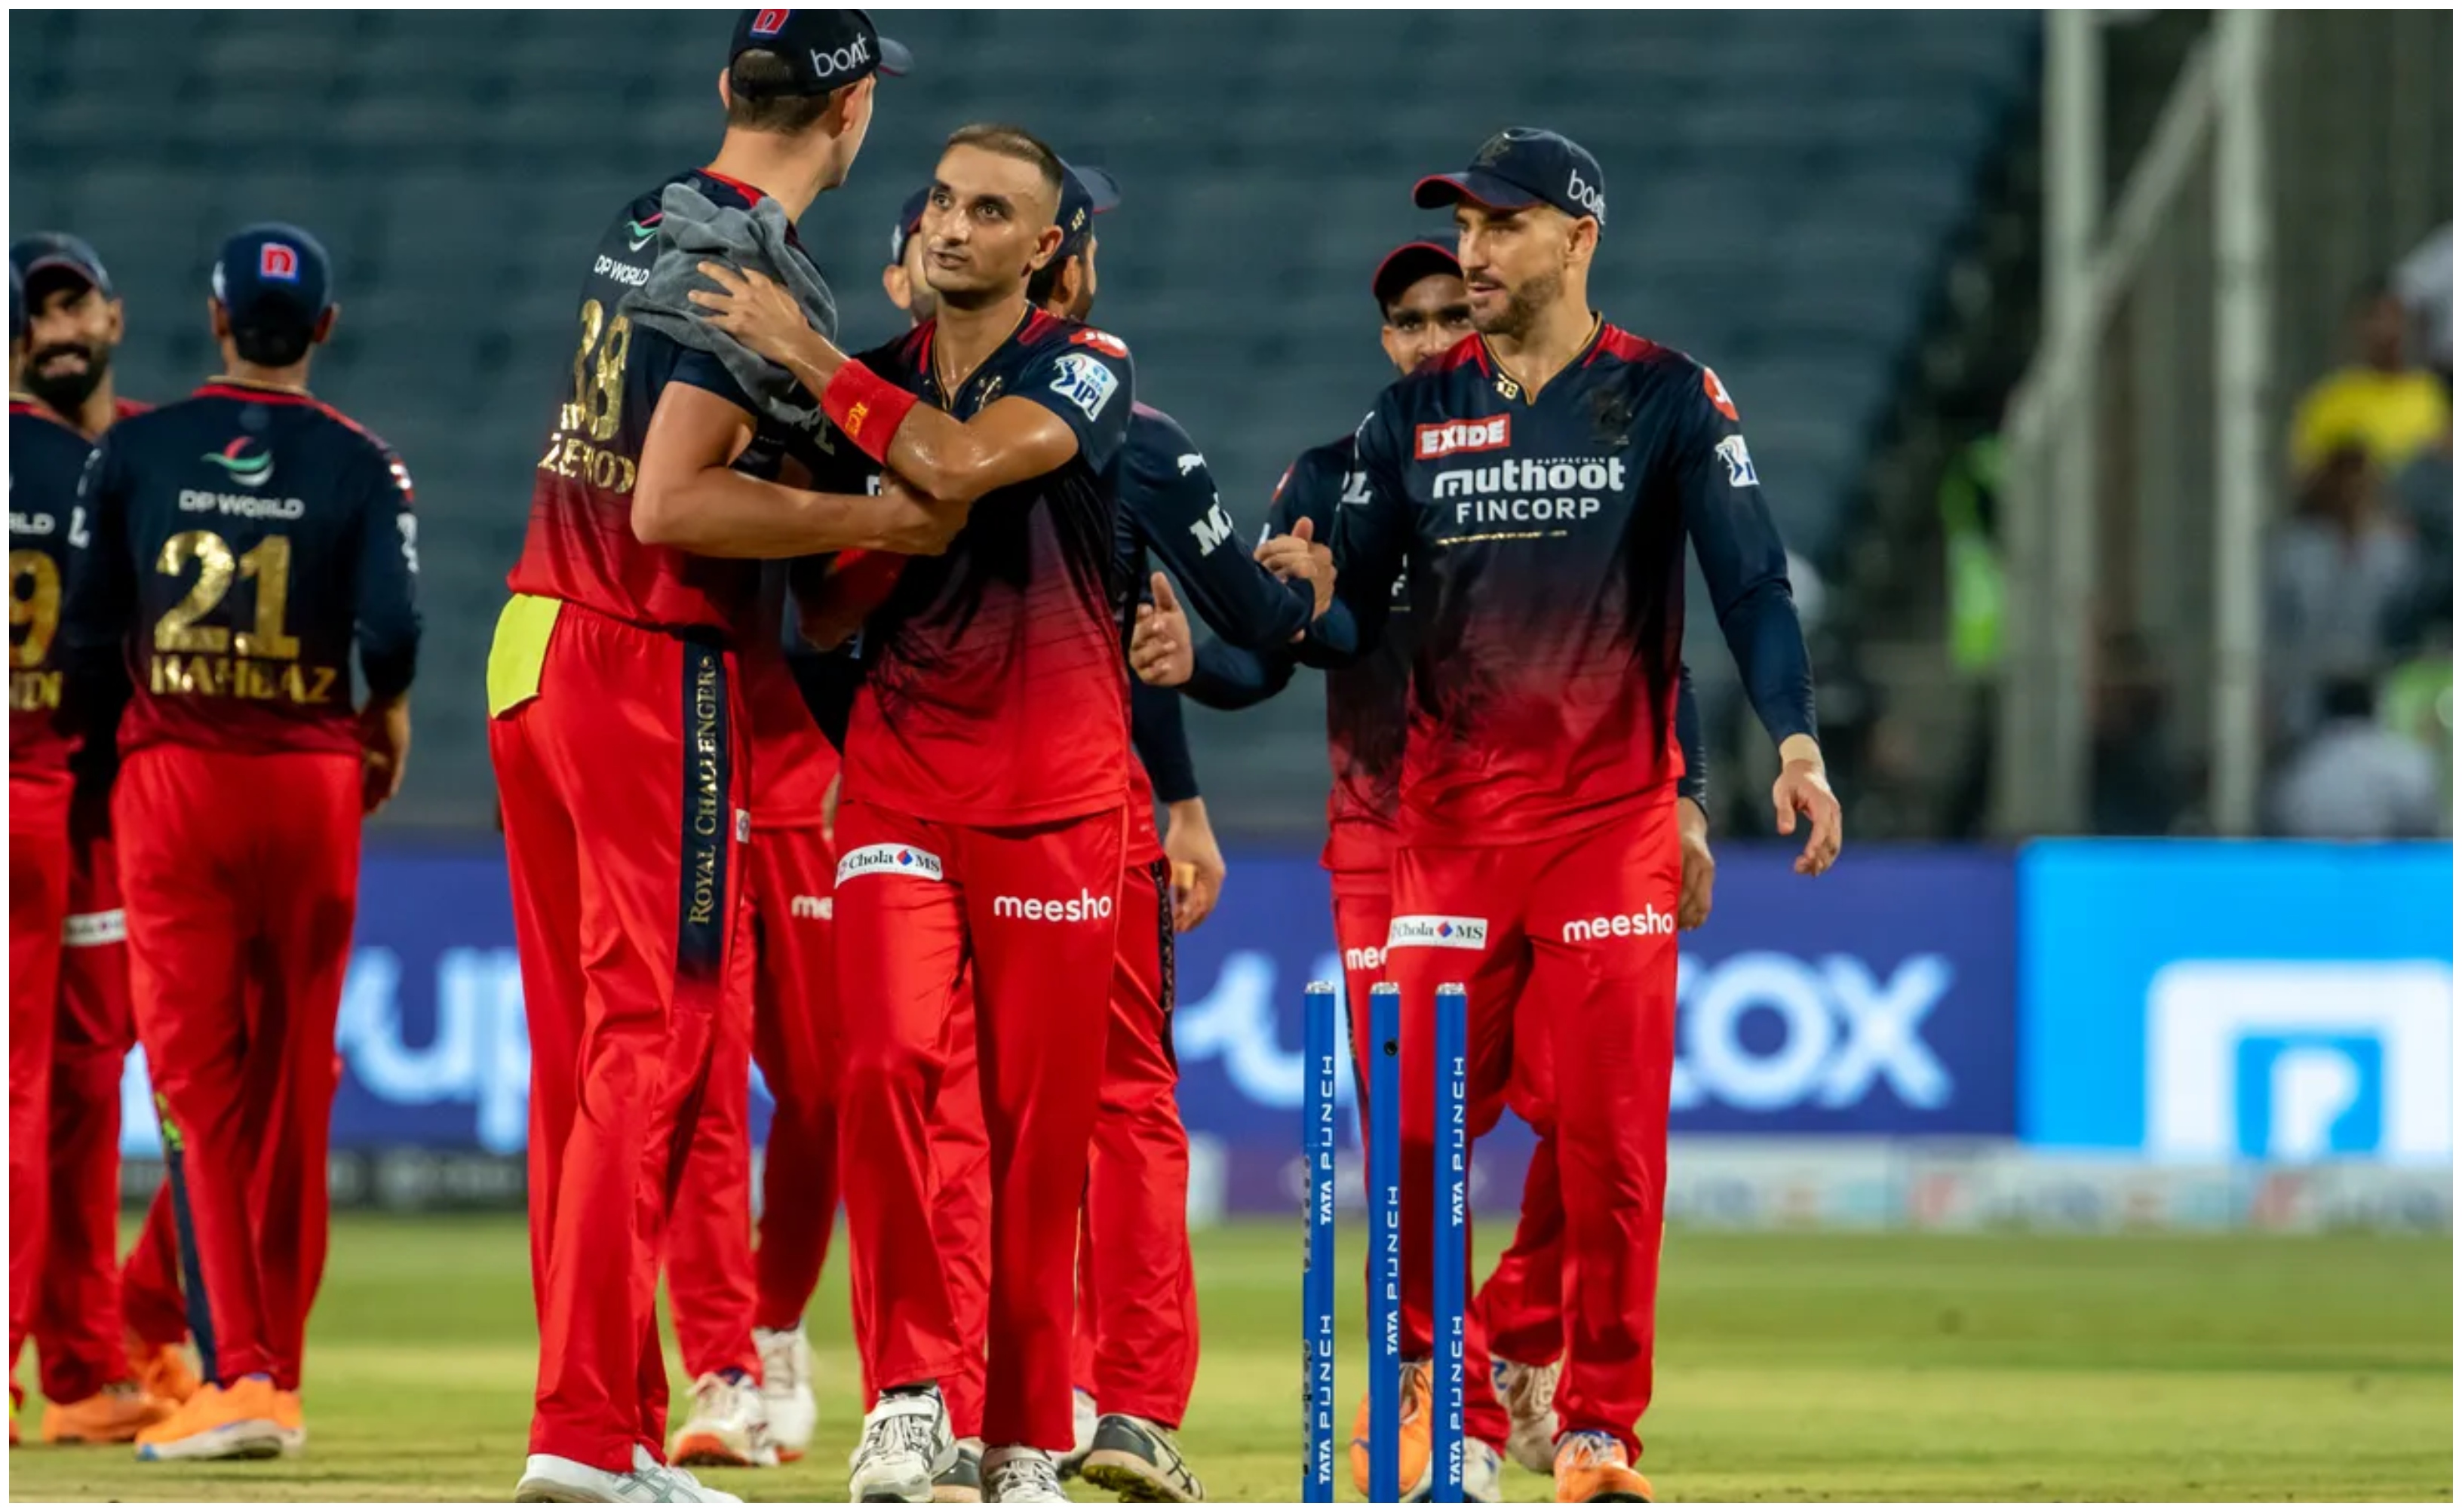 RCB defeated CSK by 13 runs | BCCI/IPL